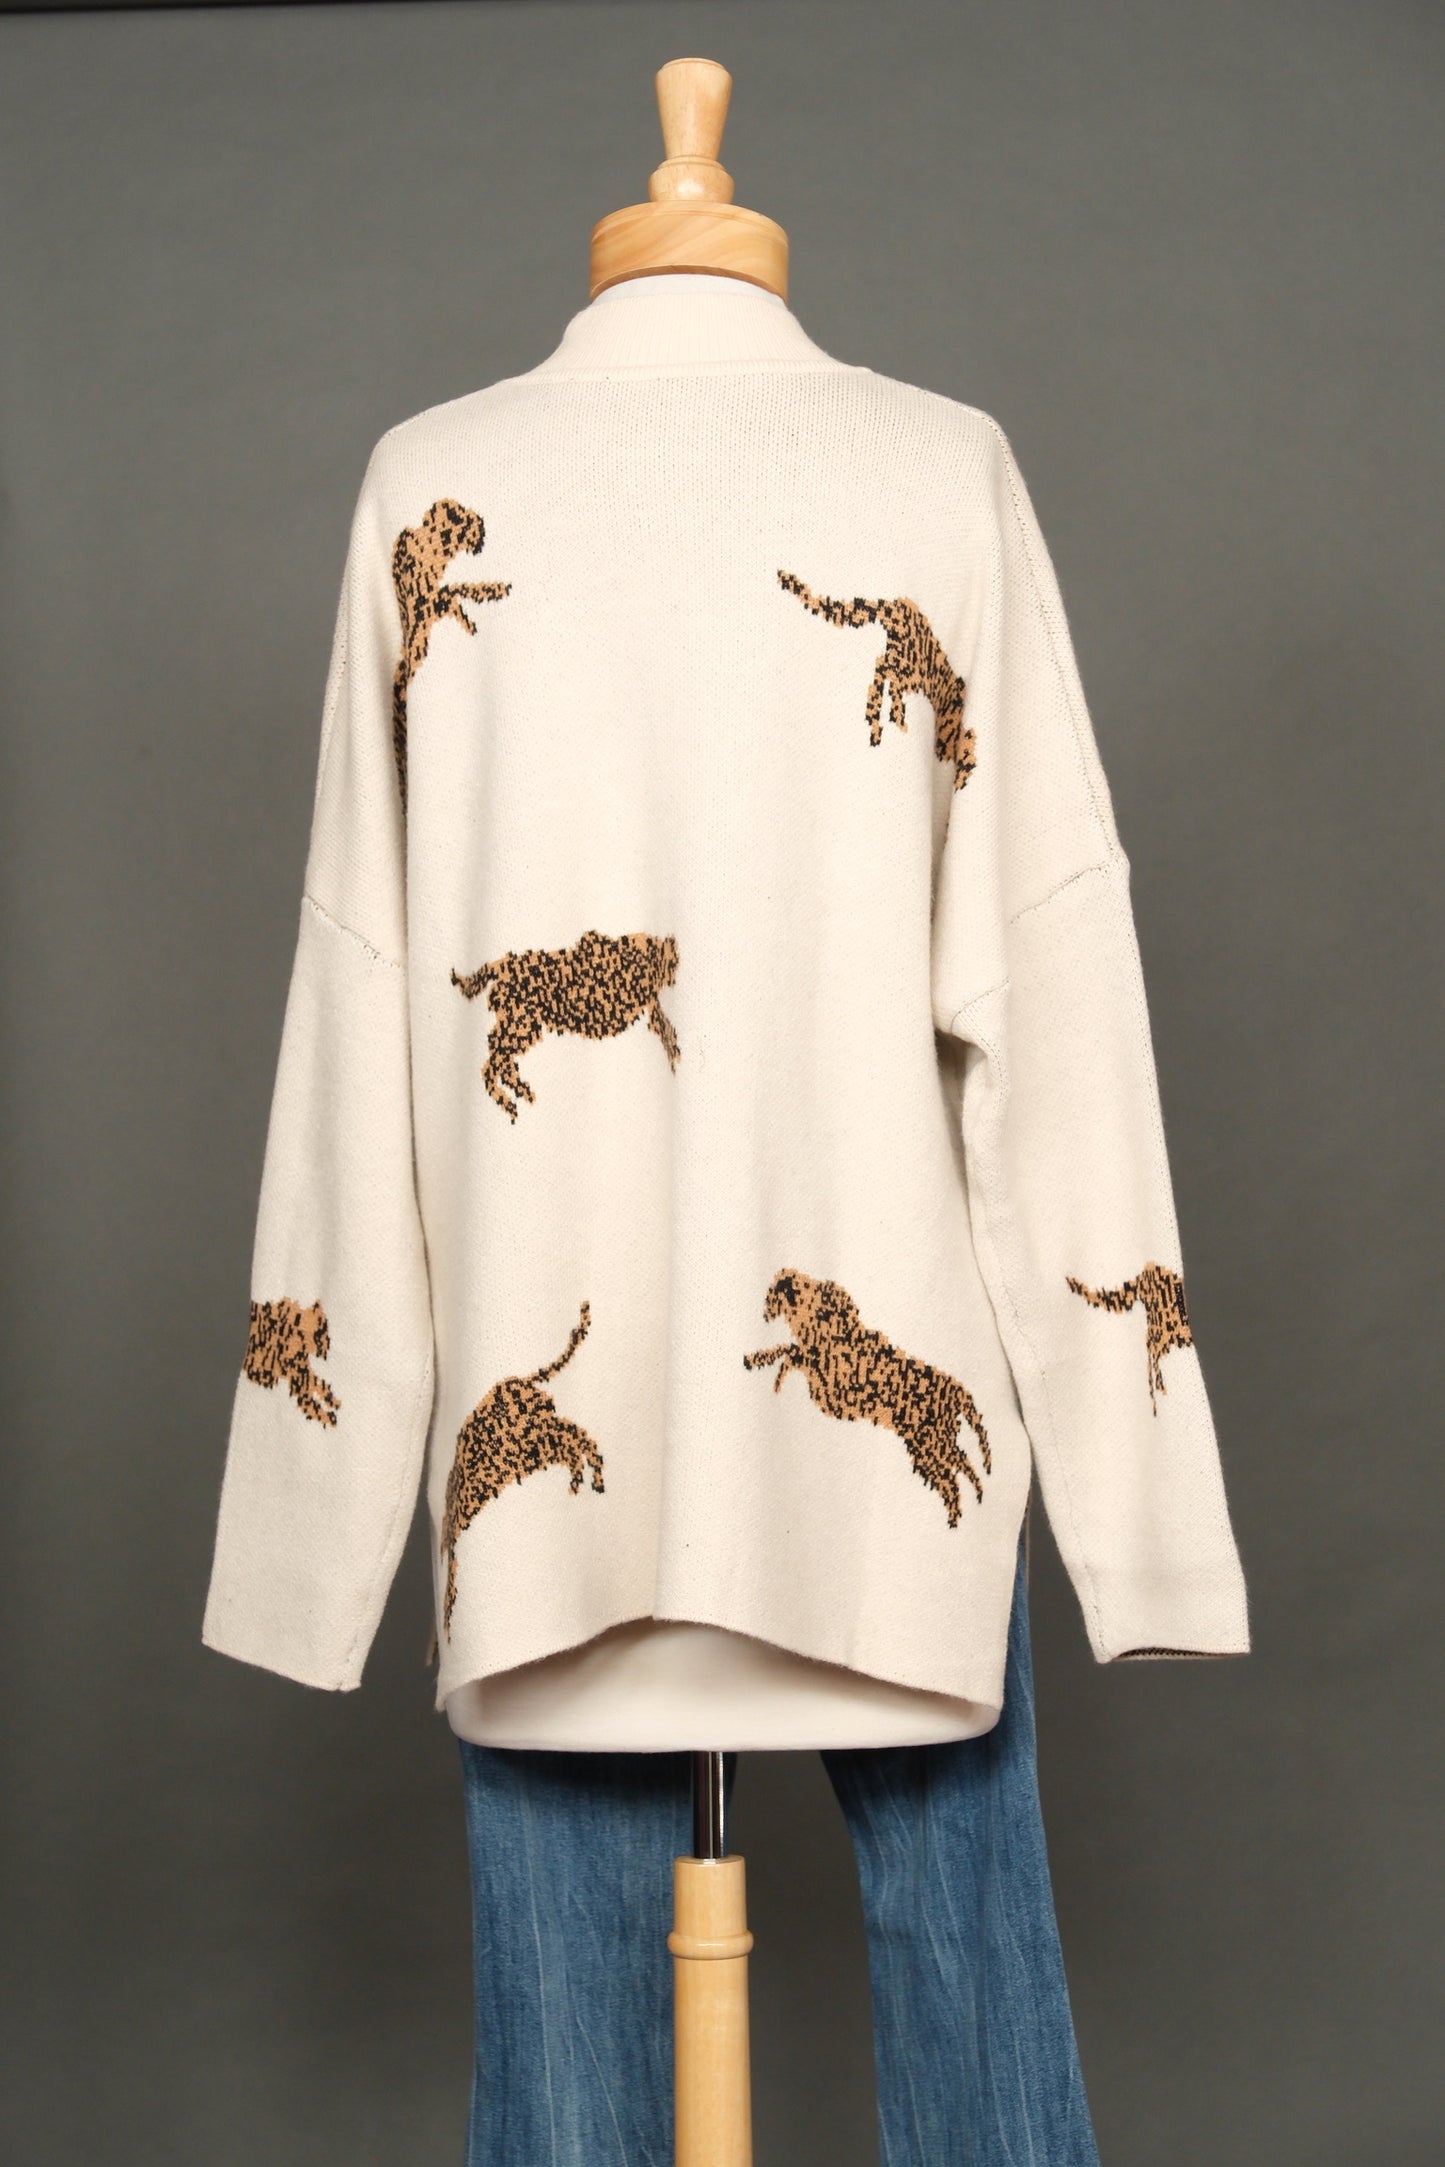 Leaping Leopard Sweater